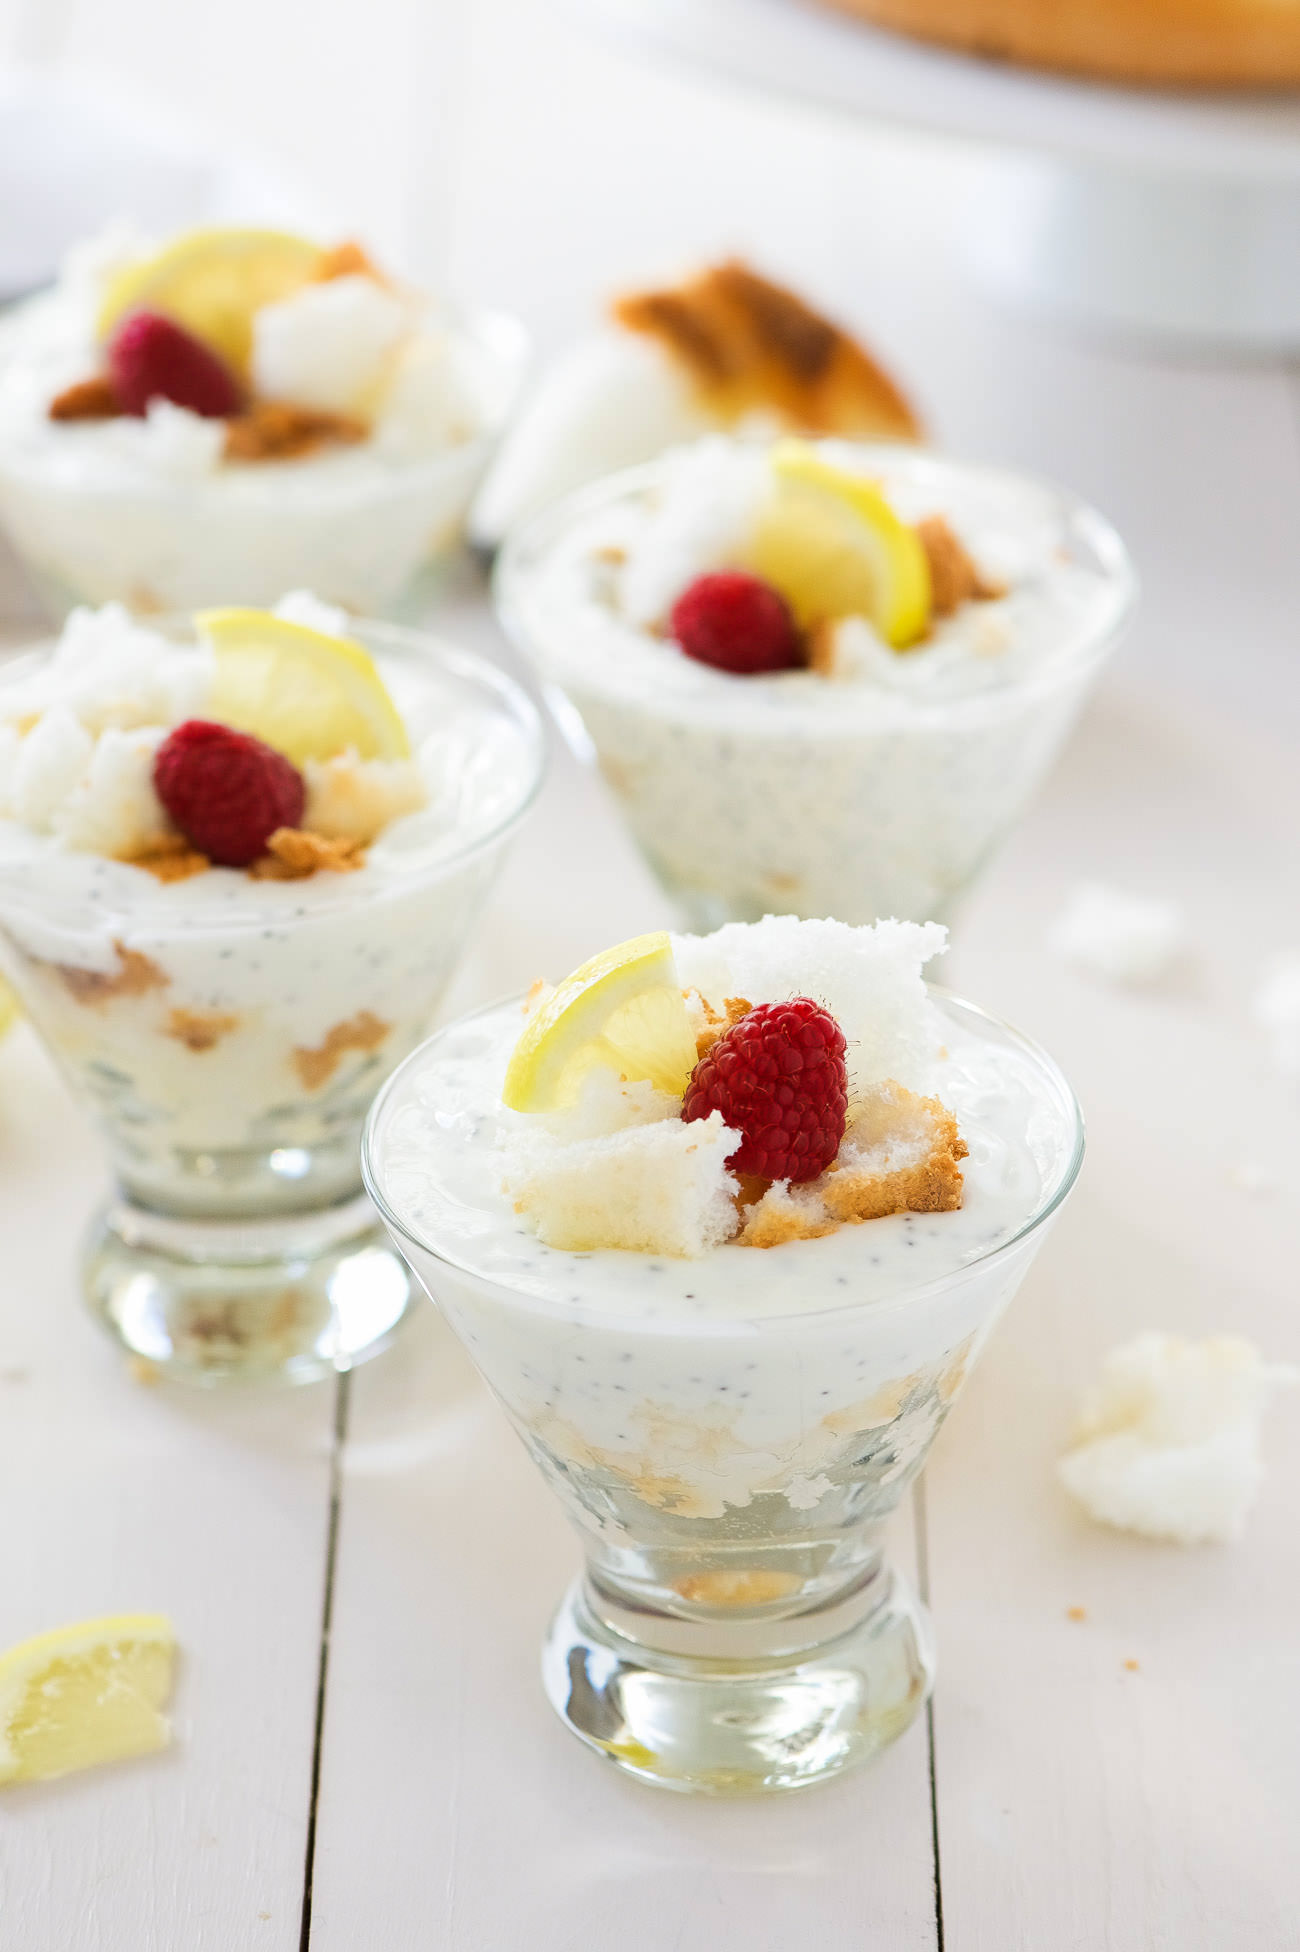 Lemon Poppy Seed Angel Food Trifles are the perfect light dessert! A quick treat with a lemon poppy seed yogurt and sweet, angel food cake crumbles!